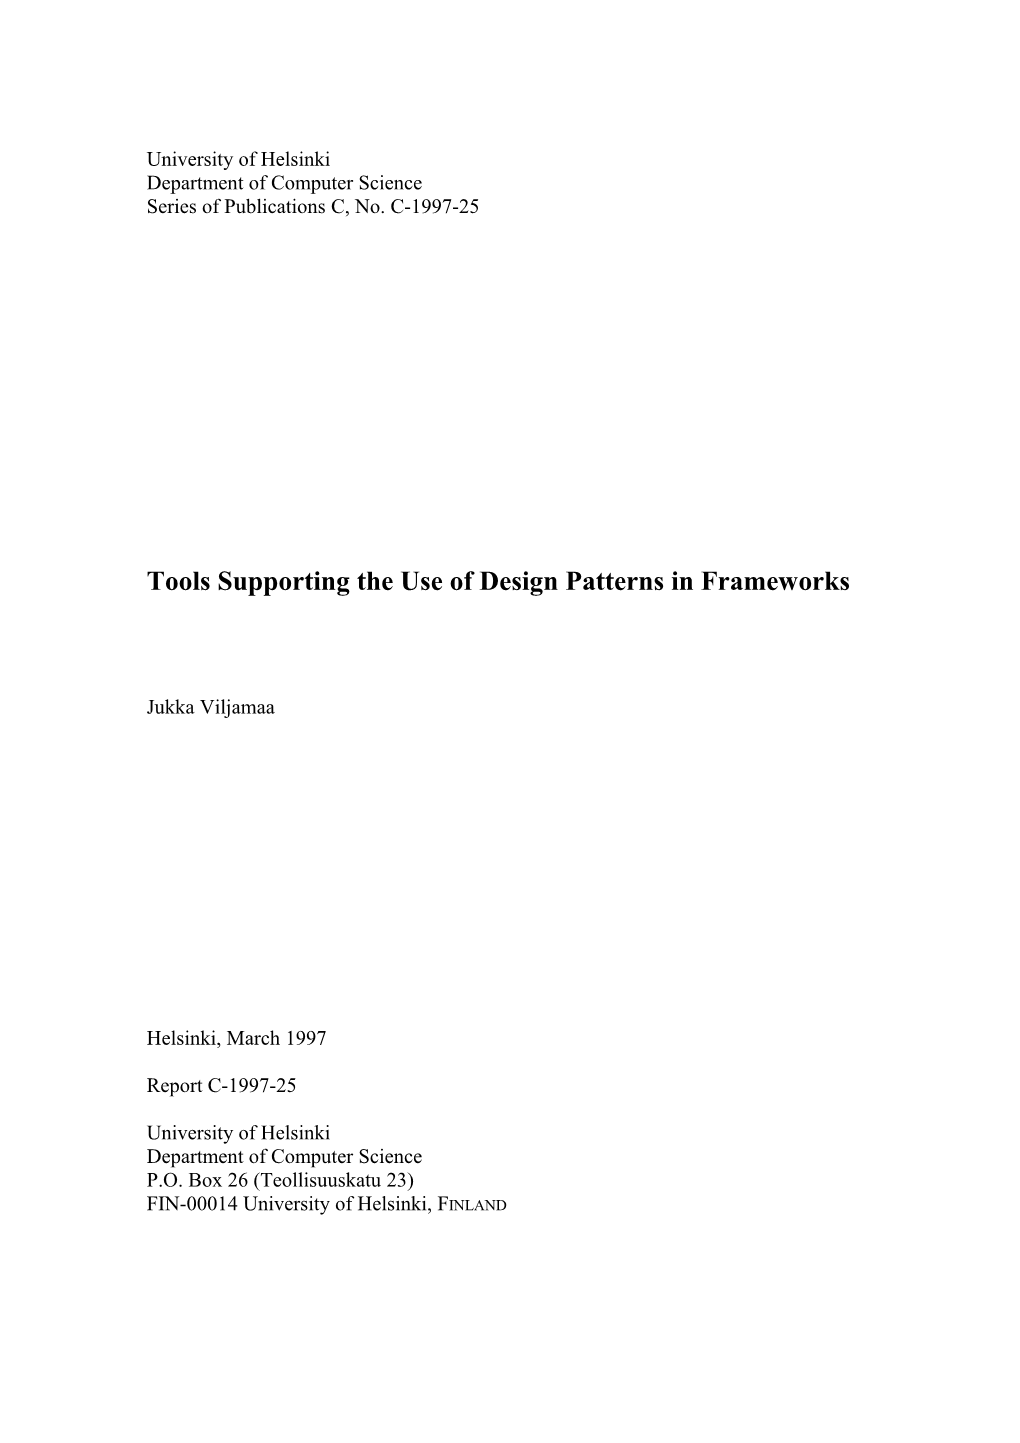 Tools Supporting the Use of Design Patterns in Frameworks